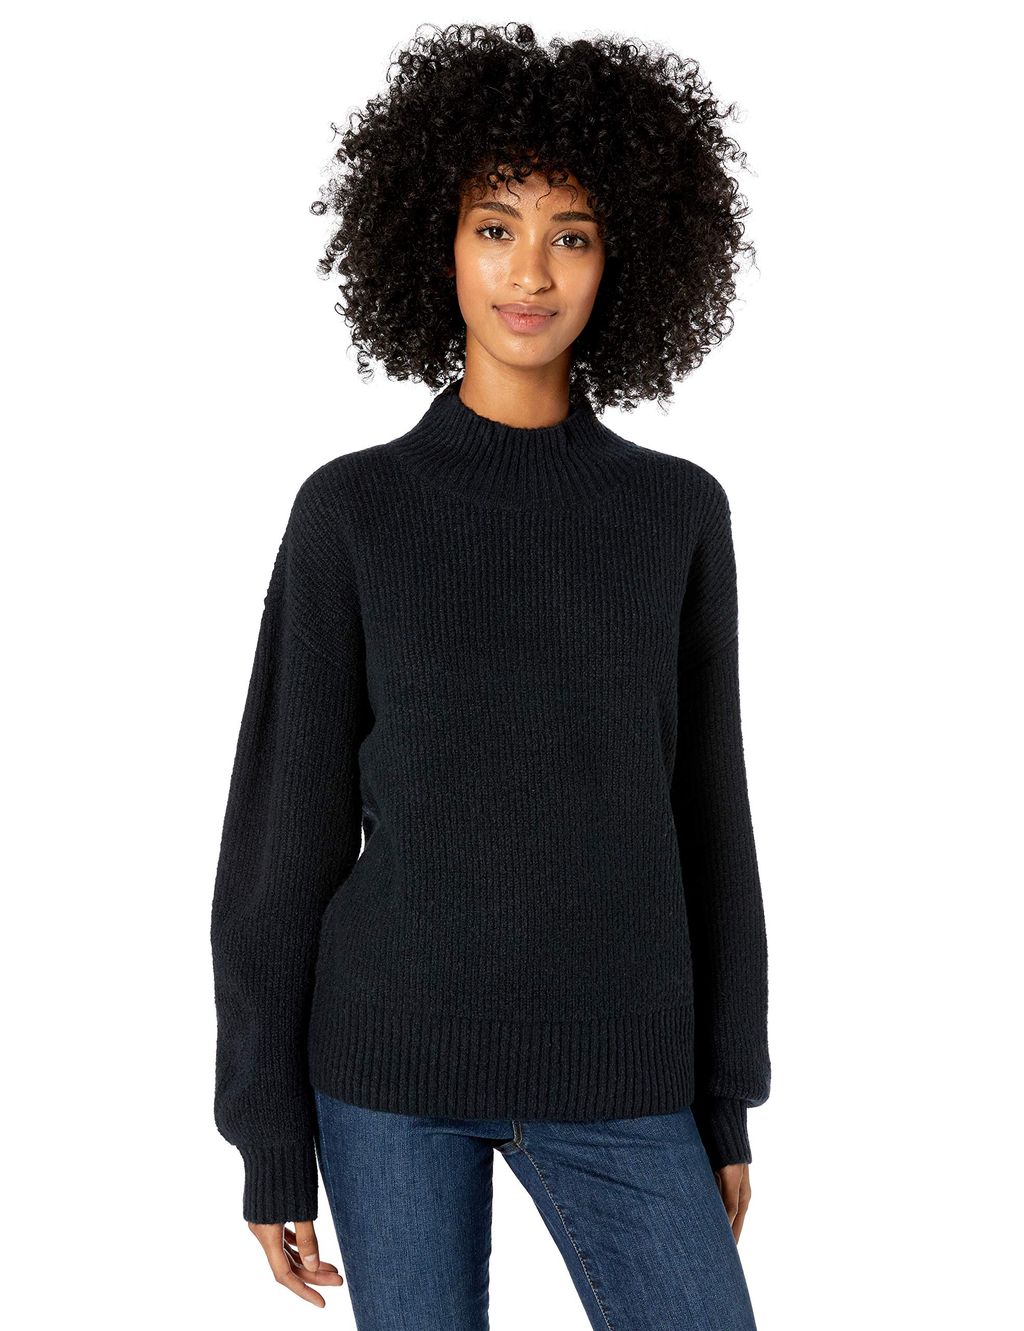 3 Affordable Fall Basics From Amazon, Reviewed | Who What Wear